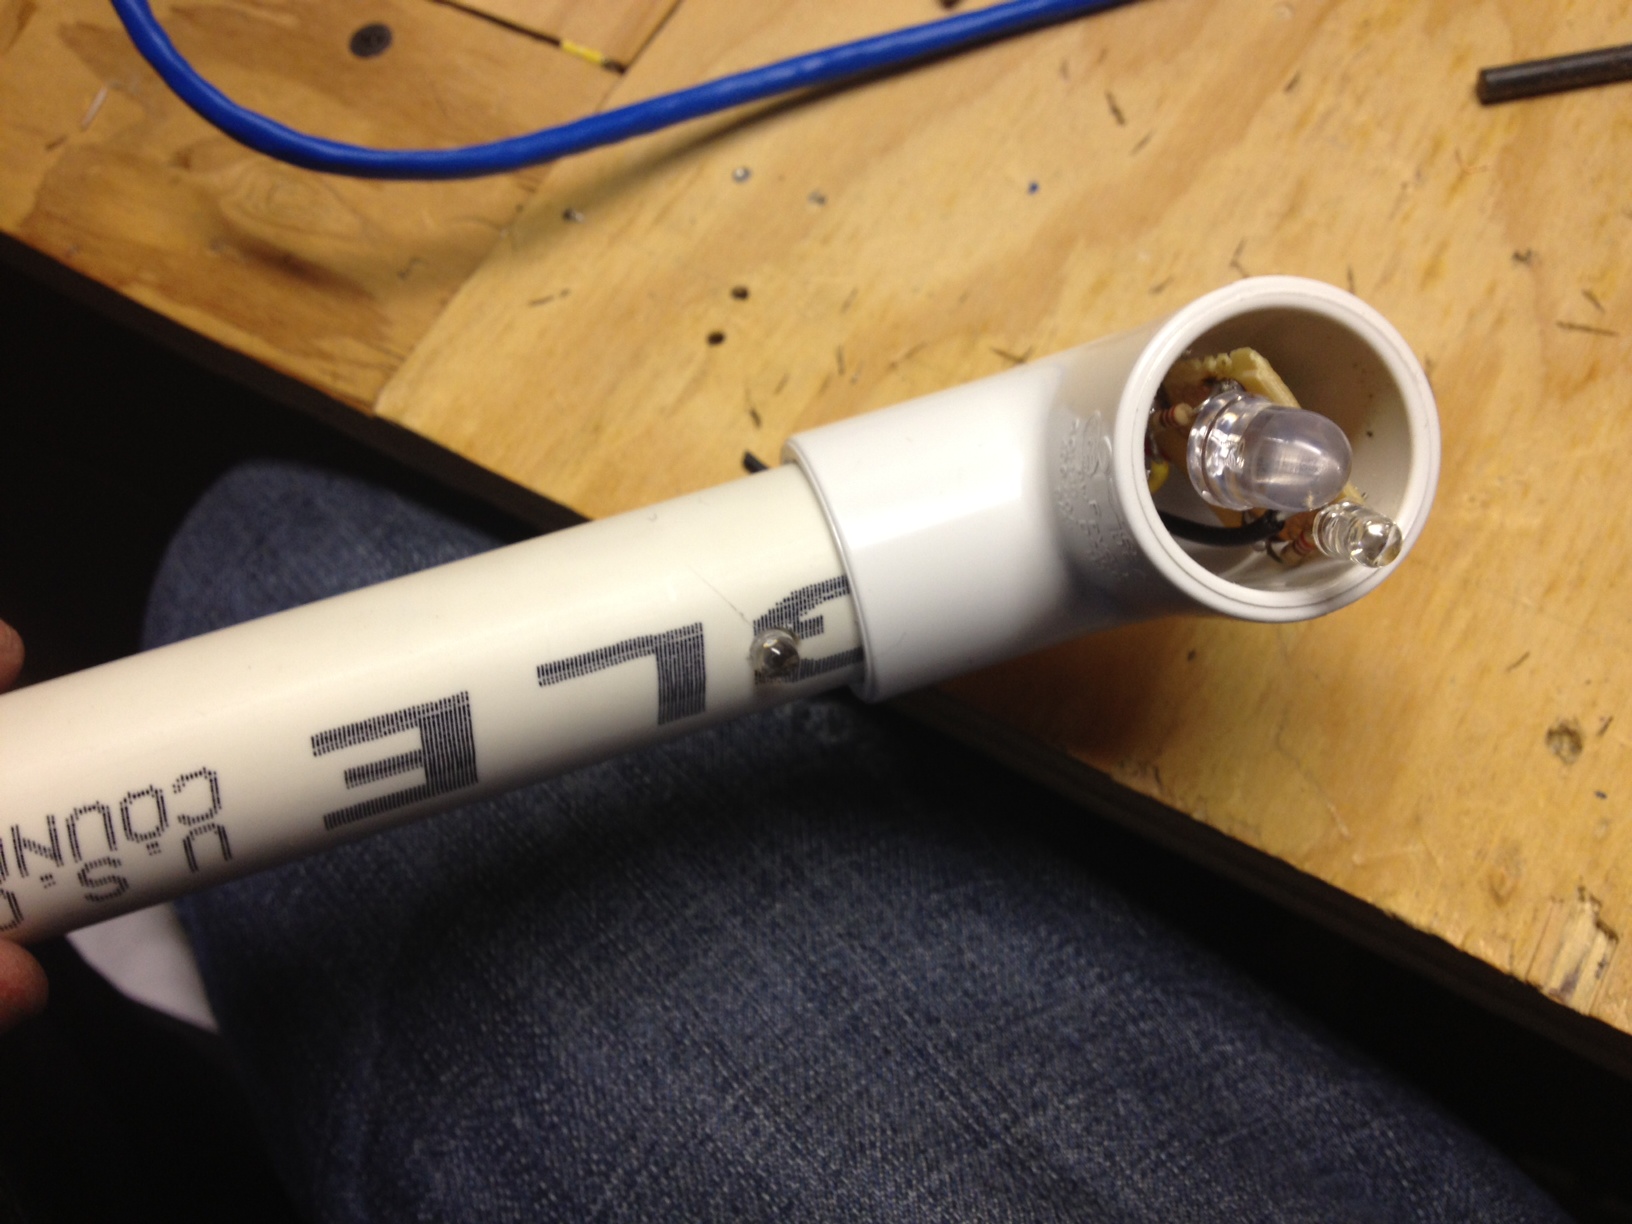 3 Leds, one jumbo and one normal on the 90* bend, 1 poked out the side of the pipe